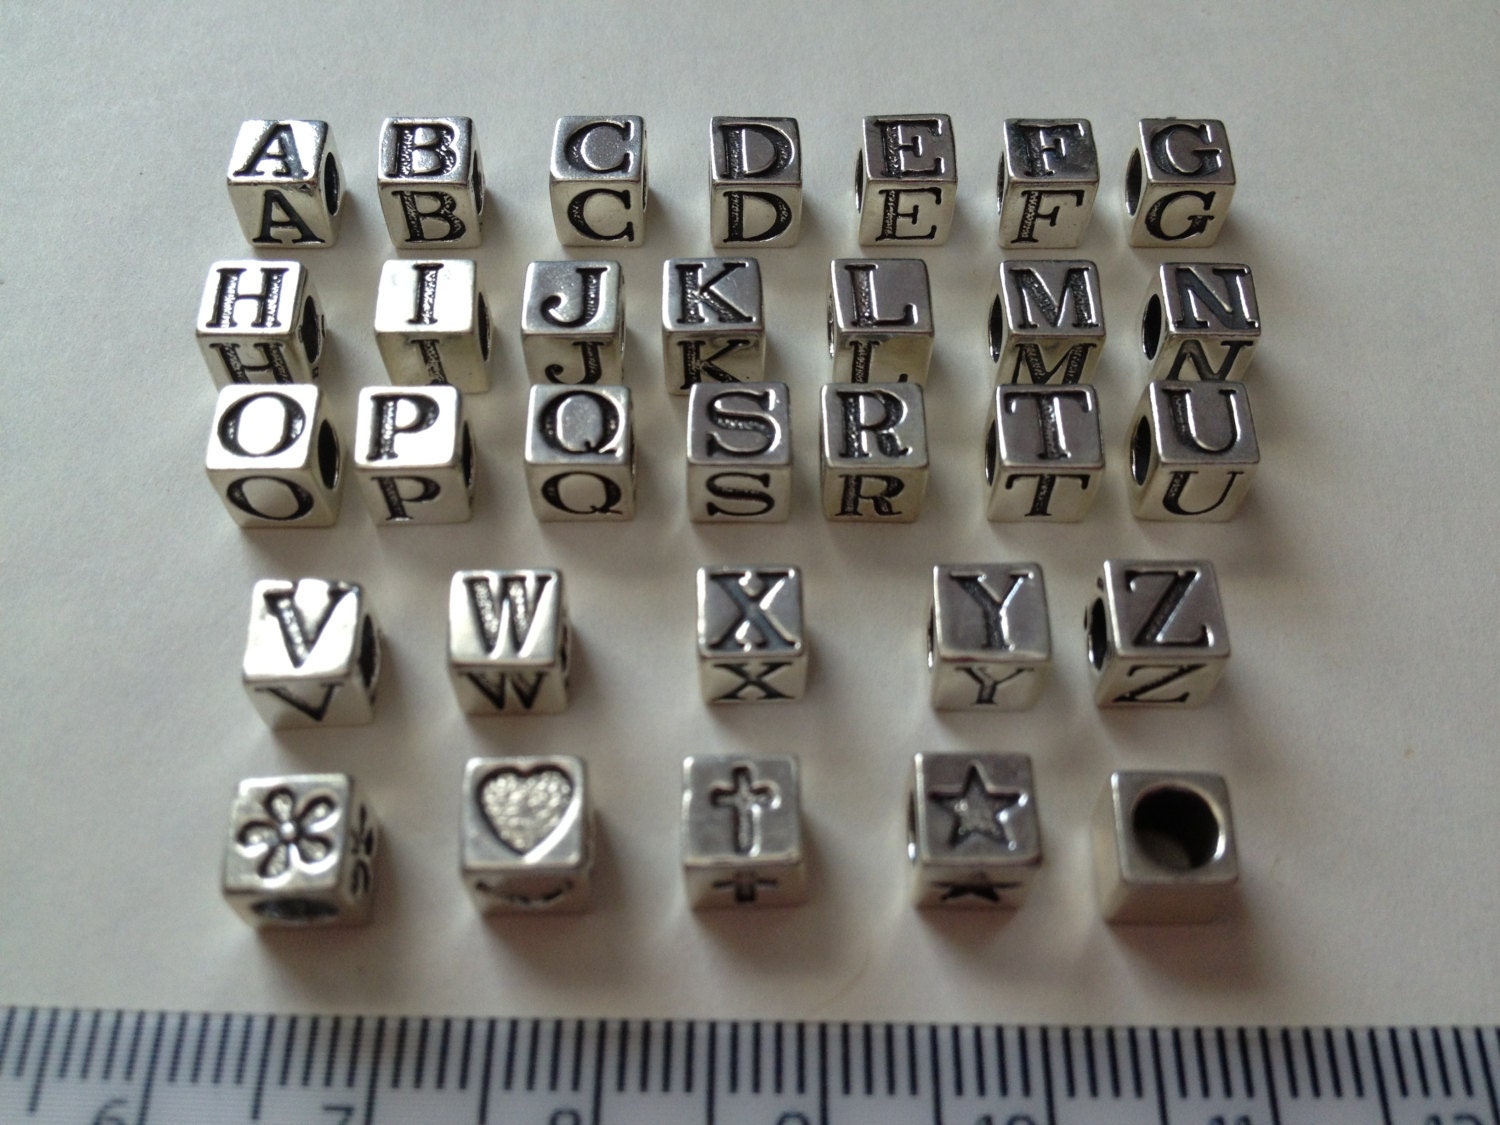 100 Piece Letter Beads CHOOSE YOUR LETTER White Beads With Black Lettering  6mm Glass Beads 